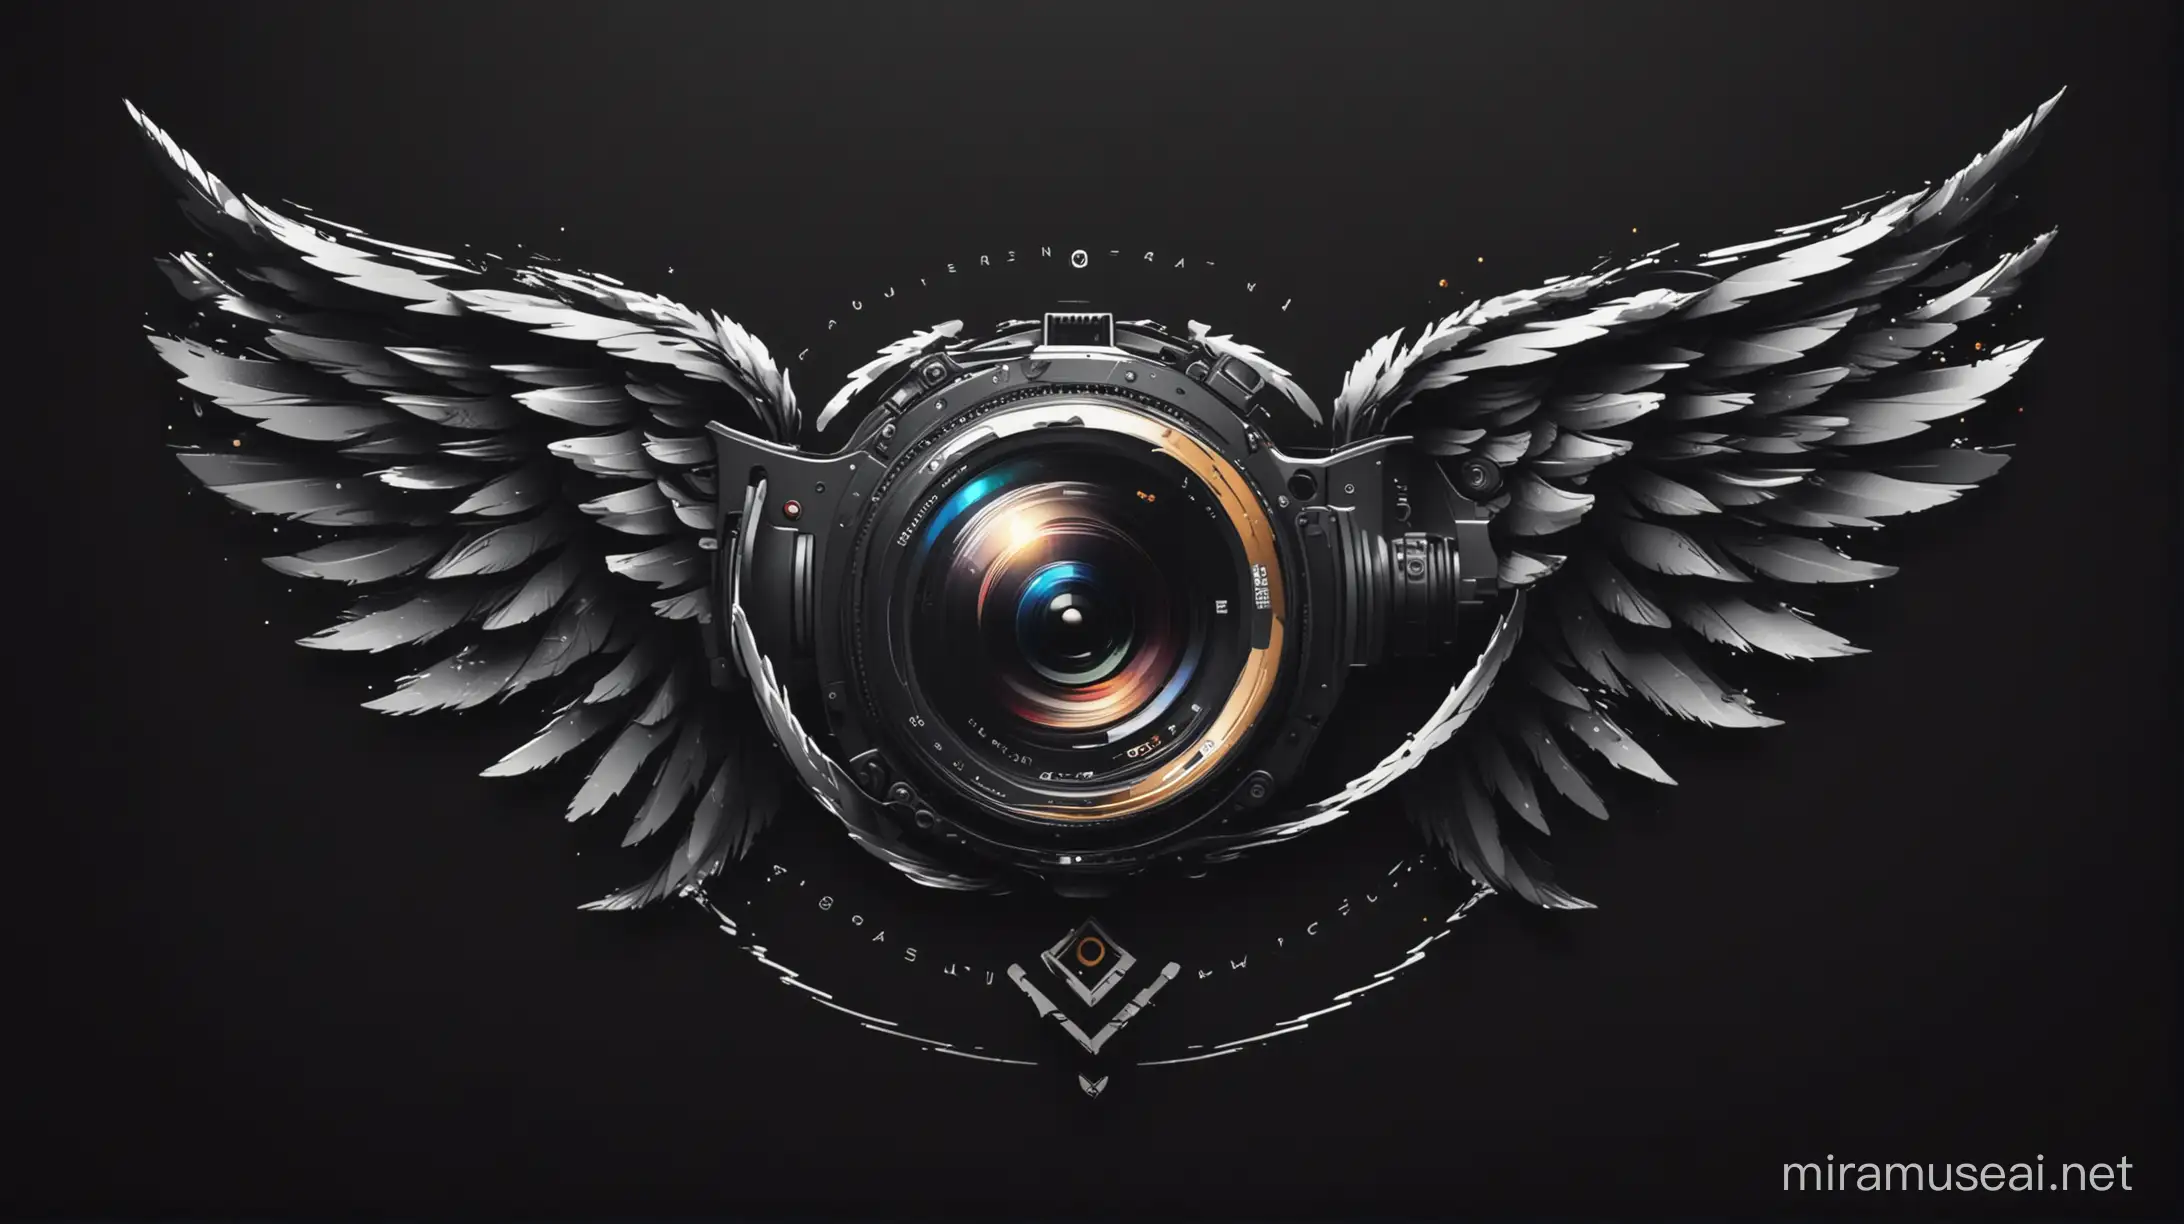 Can you design me a logo called Art ai with a winged camera vector? black background